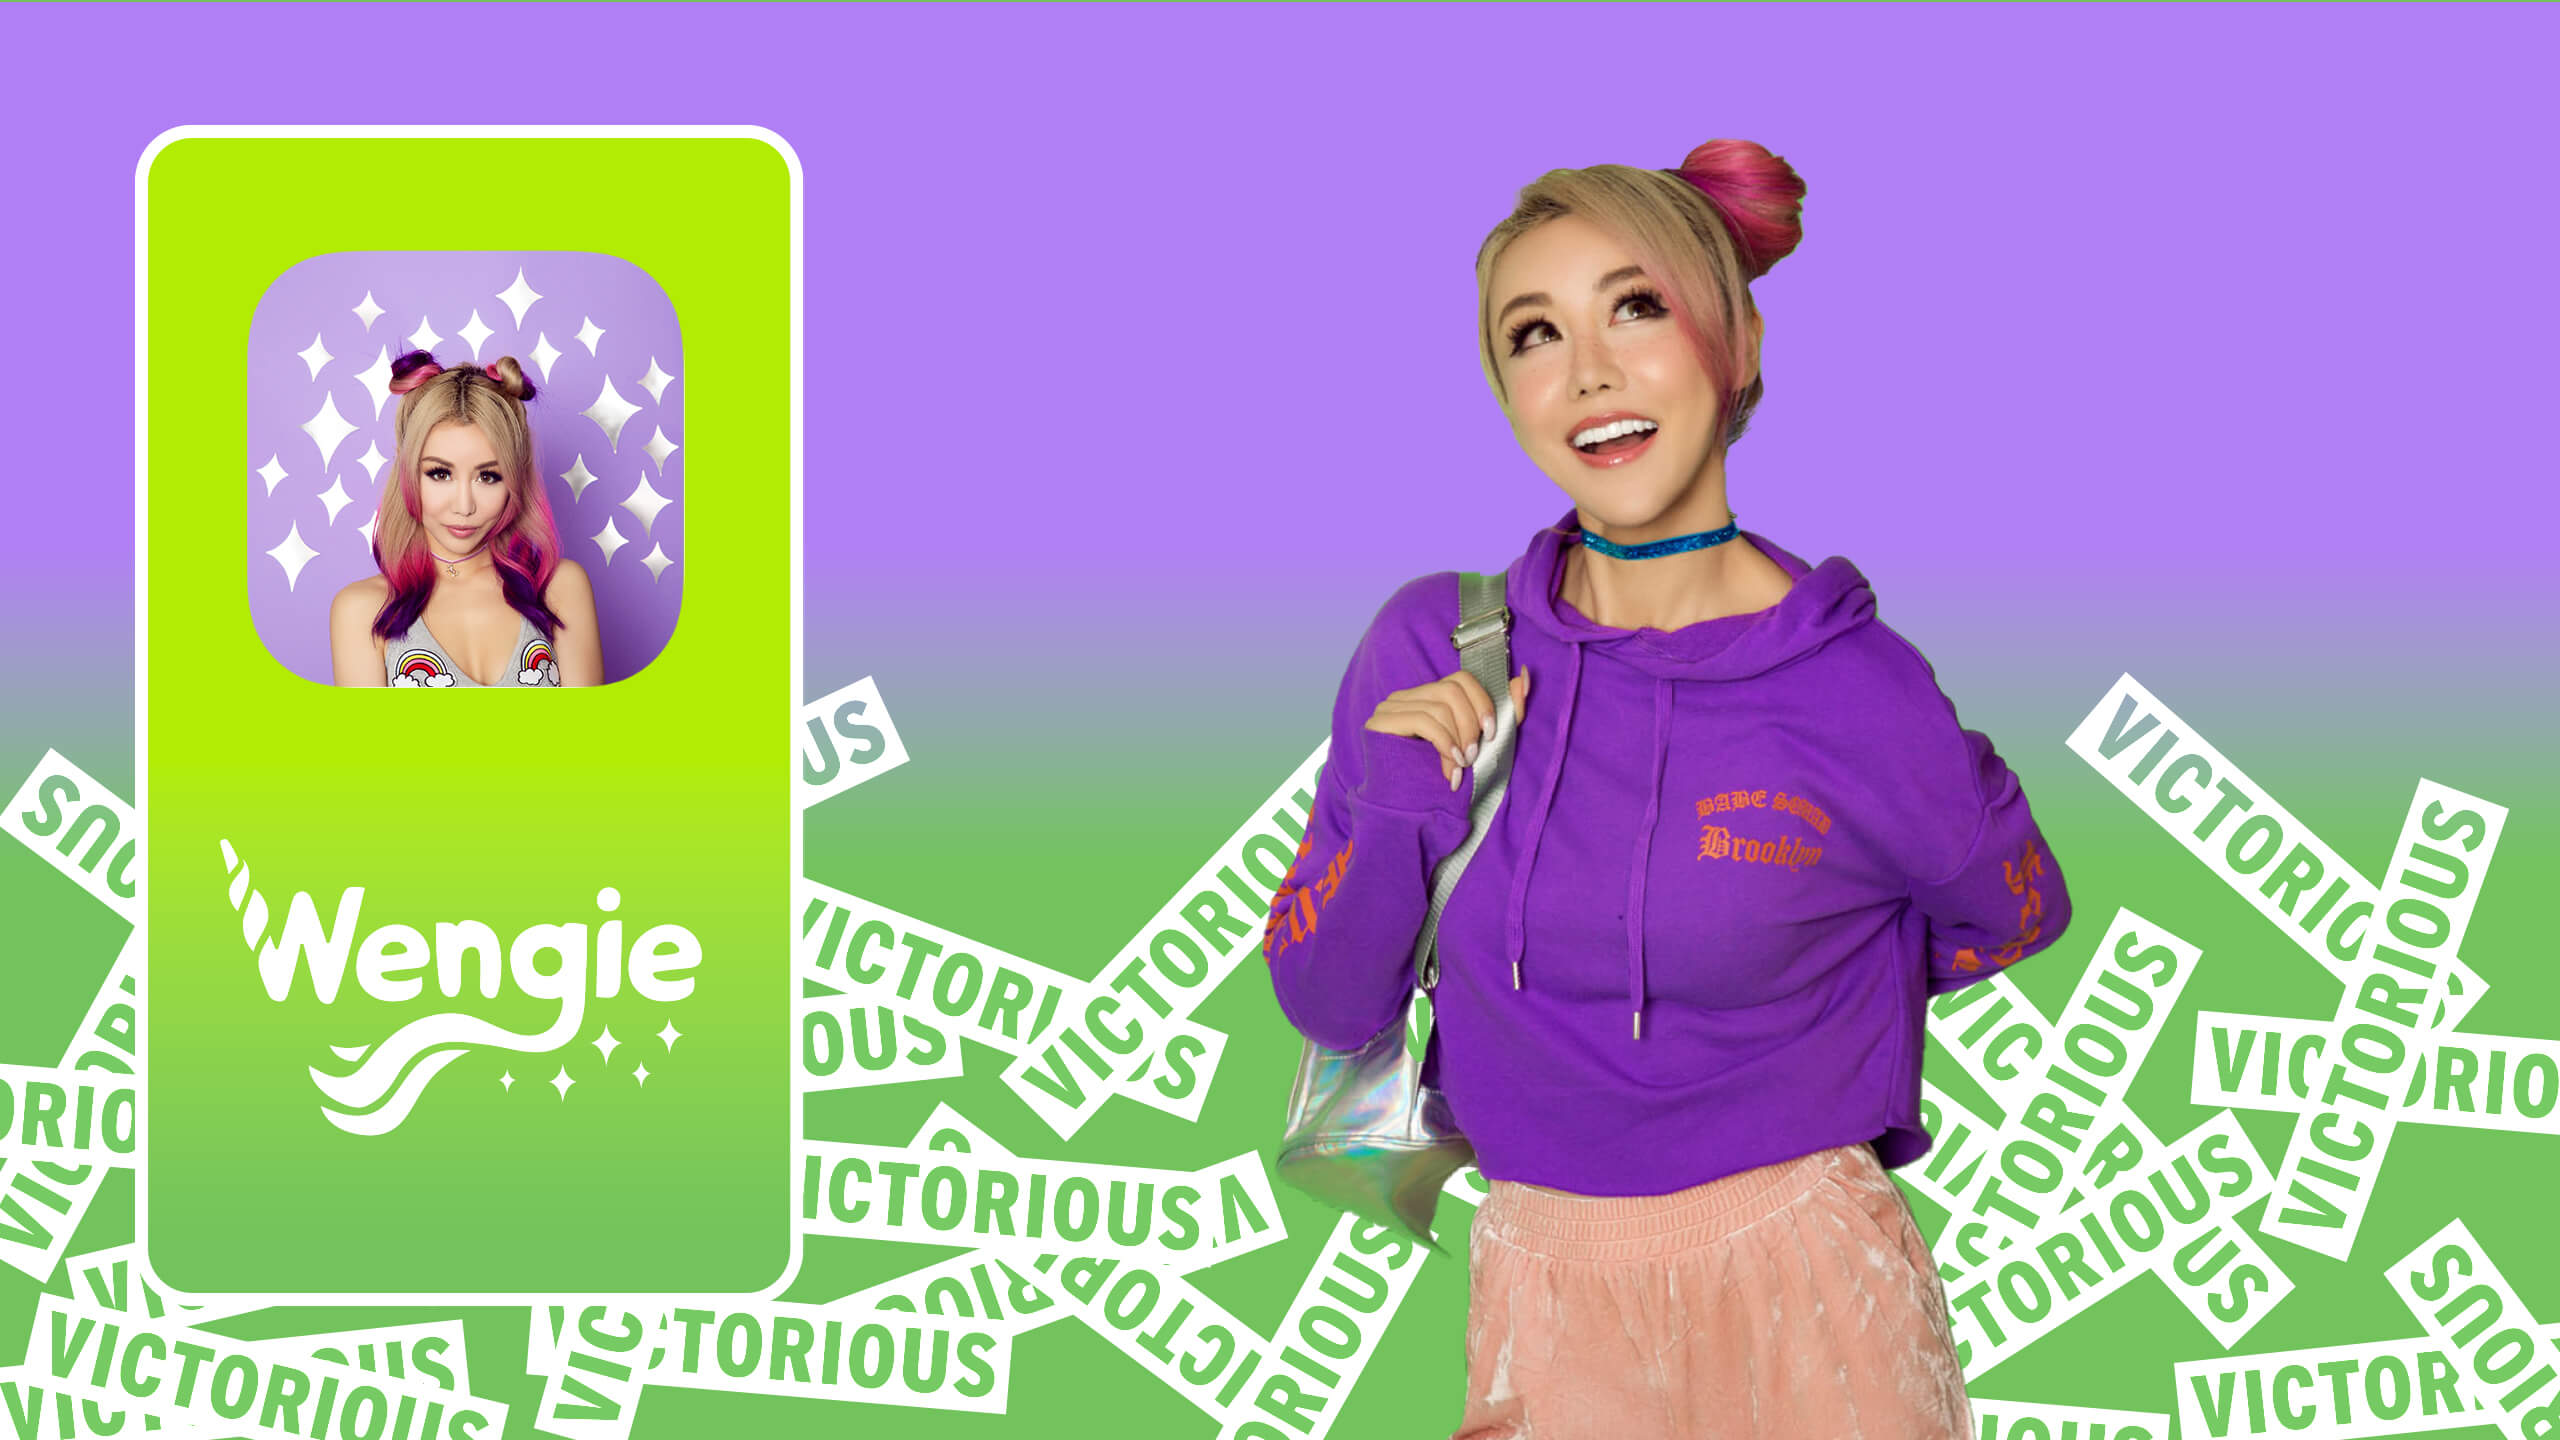 thumb-wengie-victorious-app-5